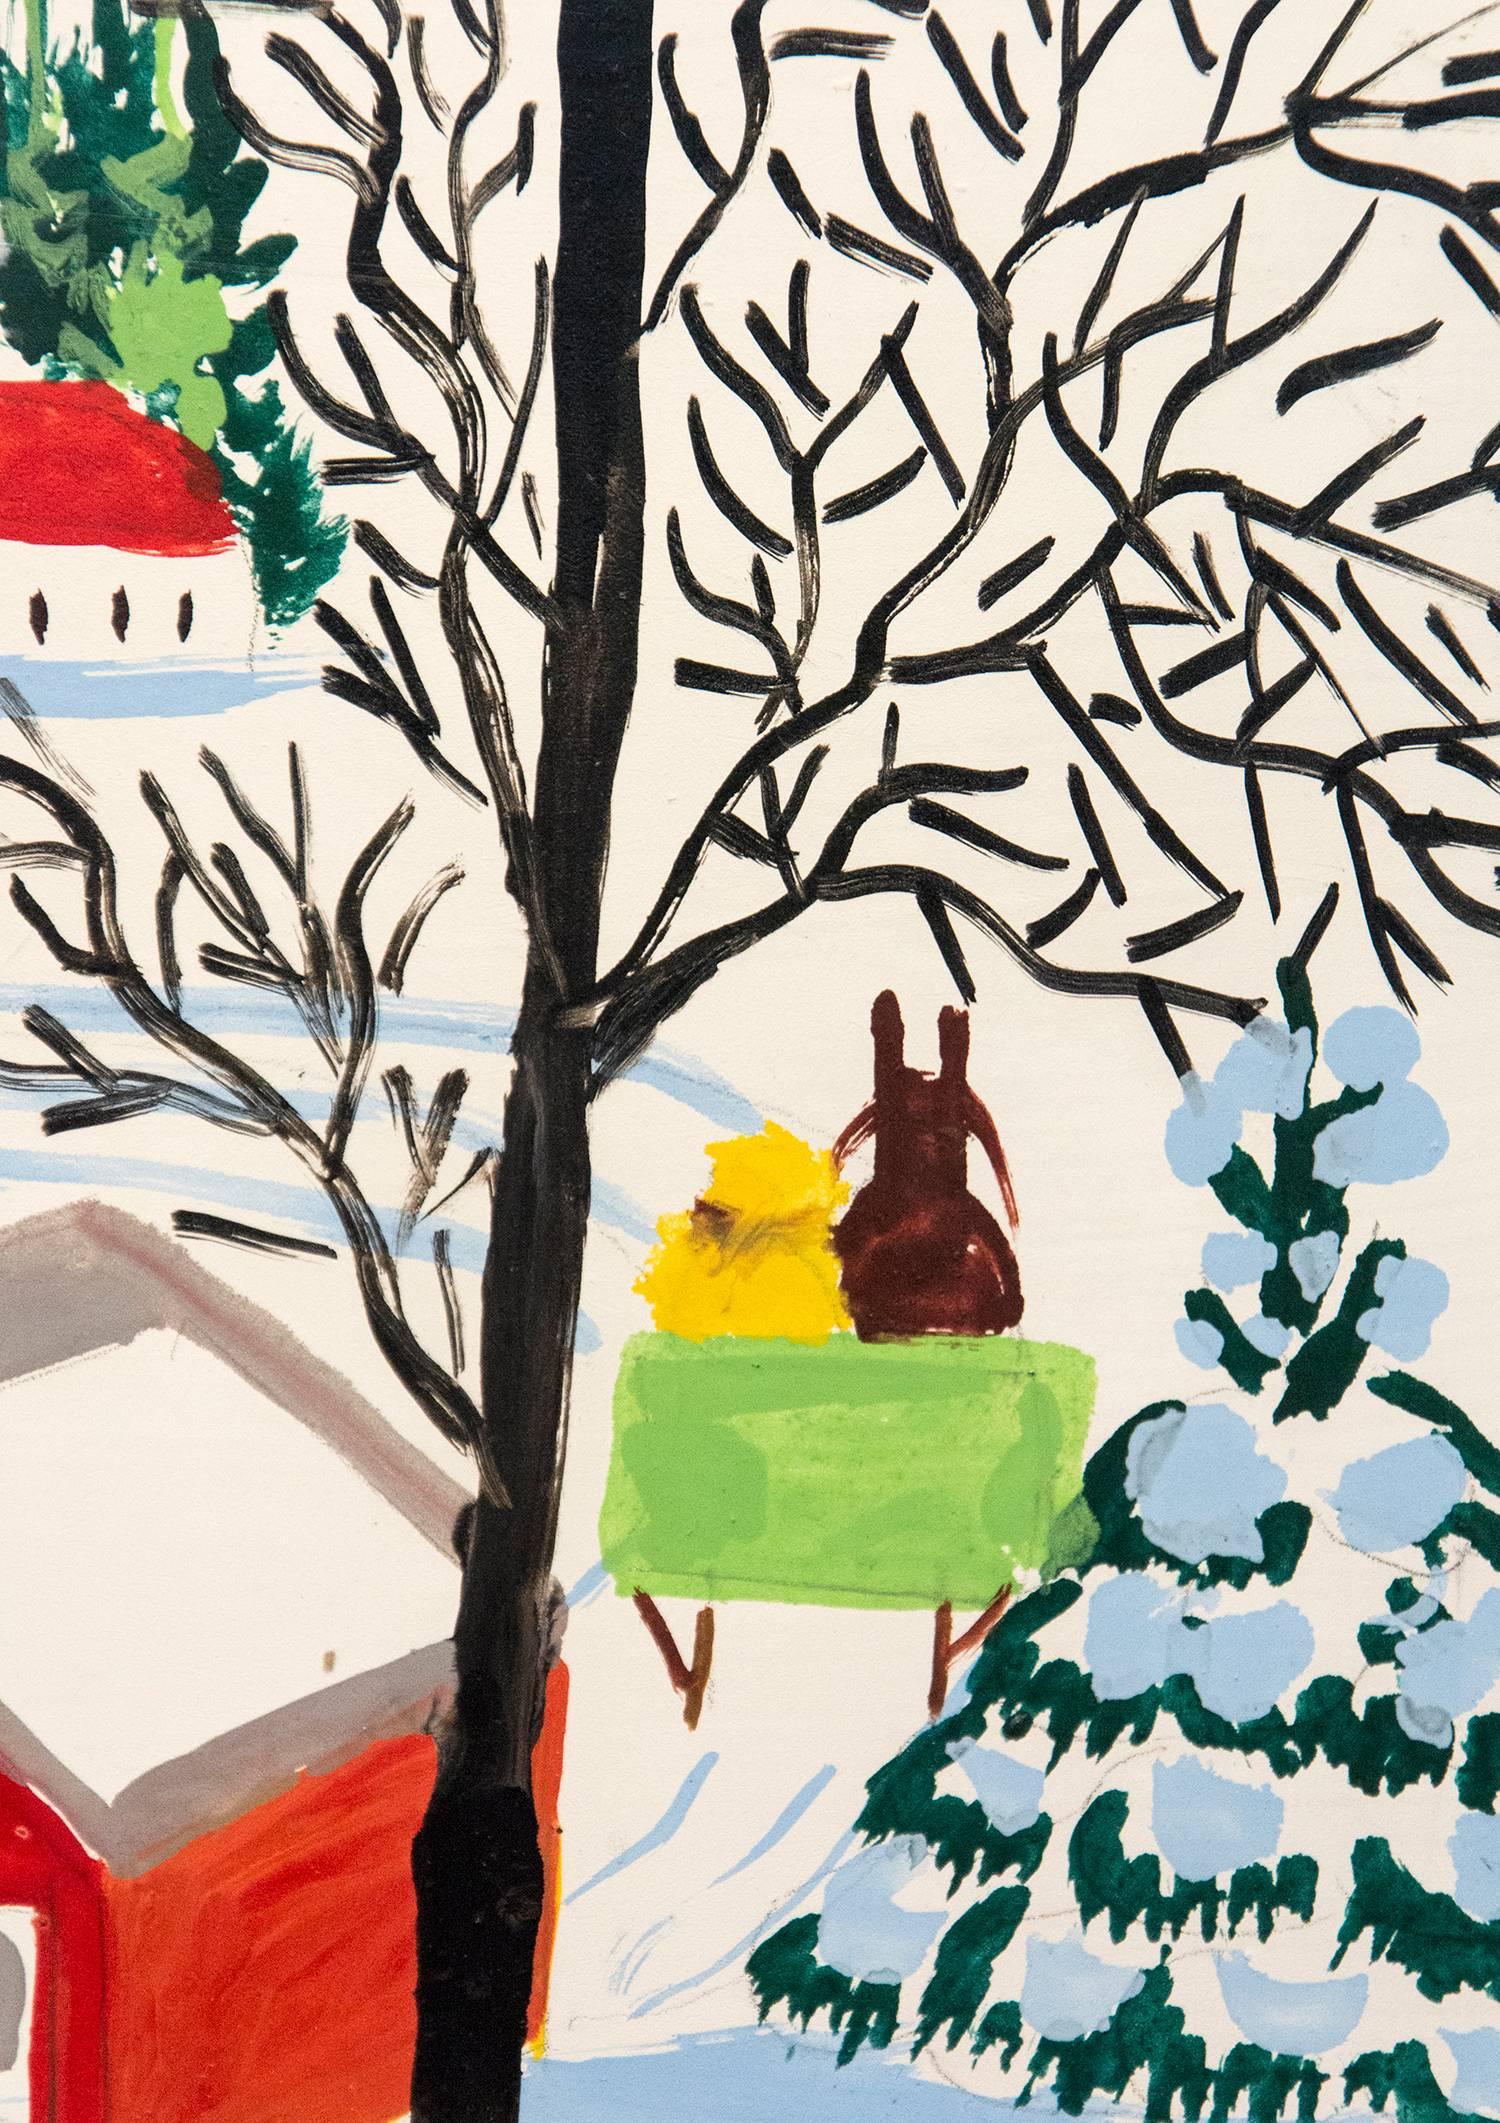 Three horse drawn sleighs pass through a covered bridge towards a village in this delightful winter scene by folk artist Maud Lewis. Lewis’s paintings are filled with joy and depict her surroundings with humor and affection. This painting is signed